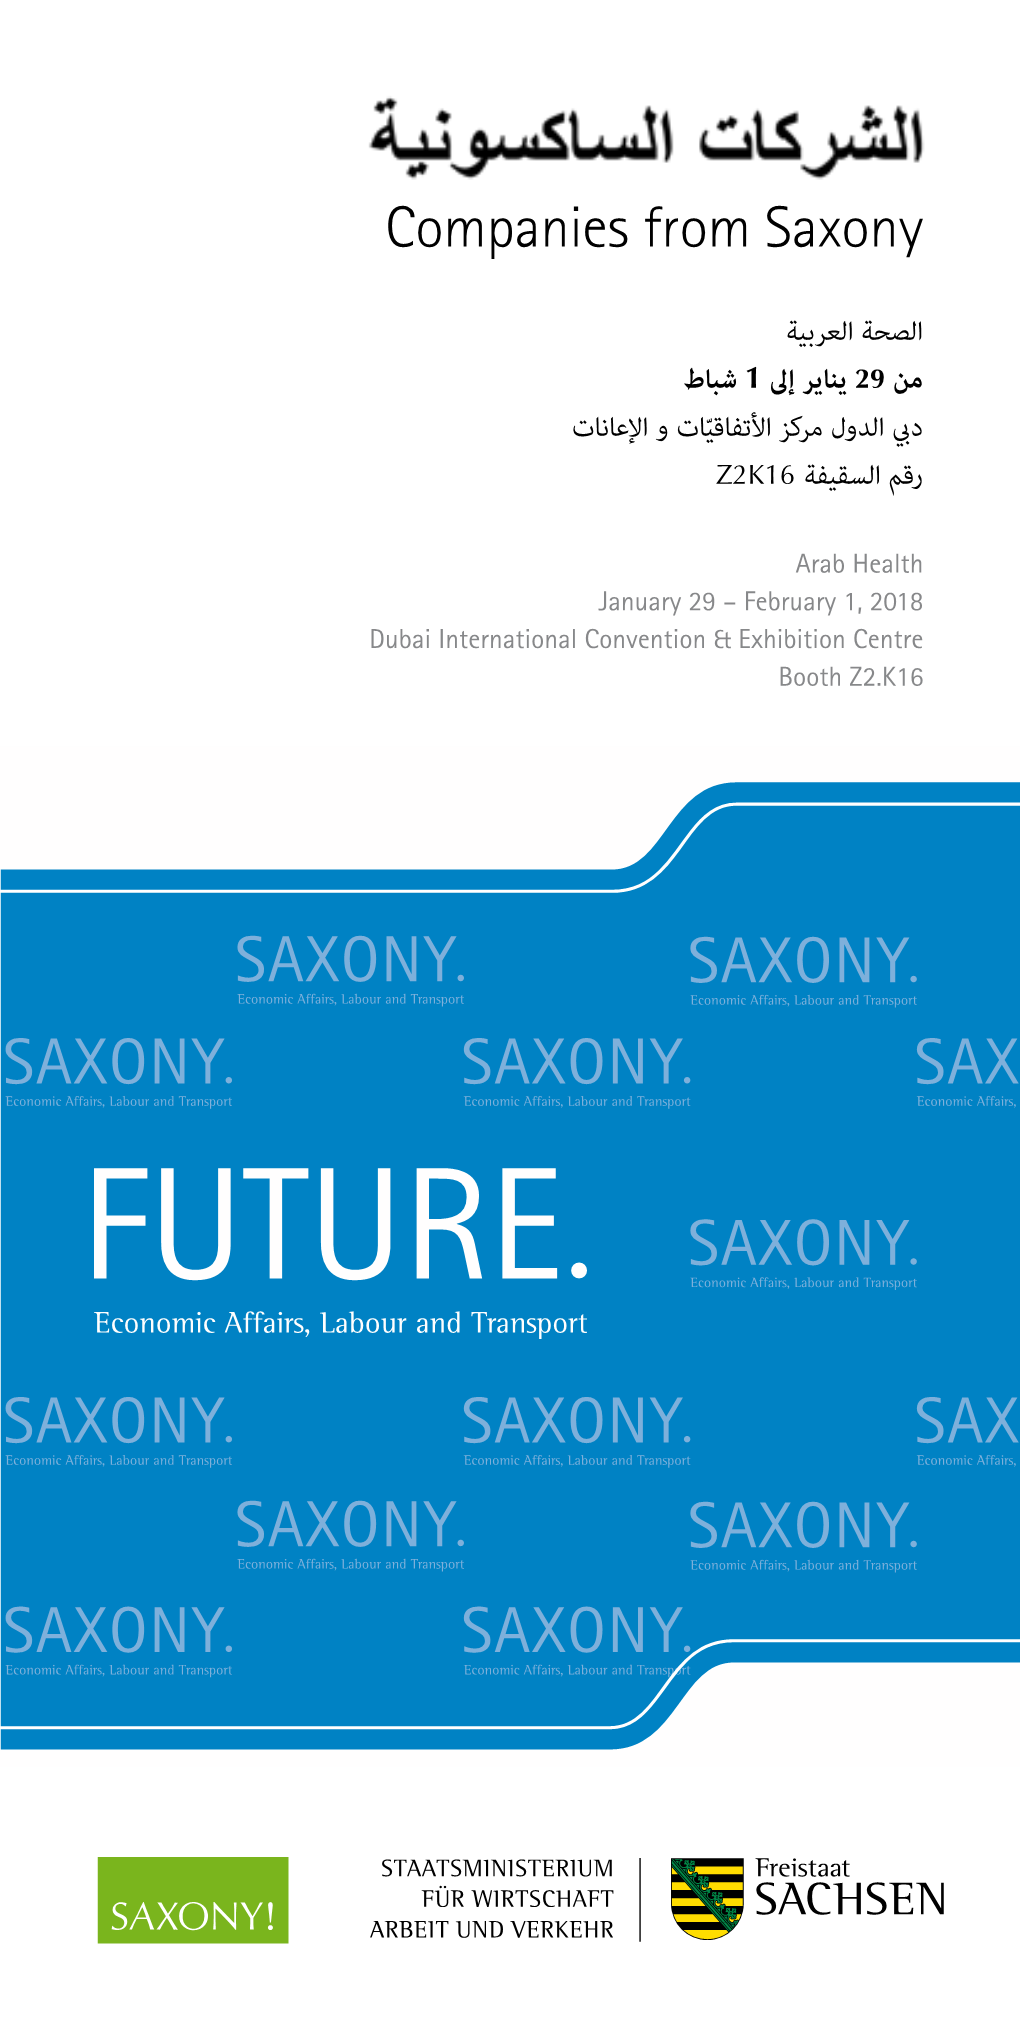 Companies from Saxony